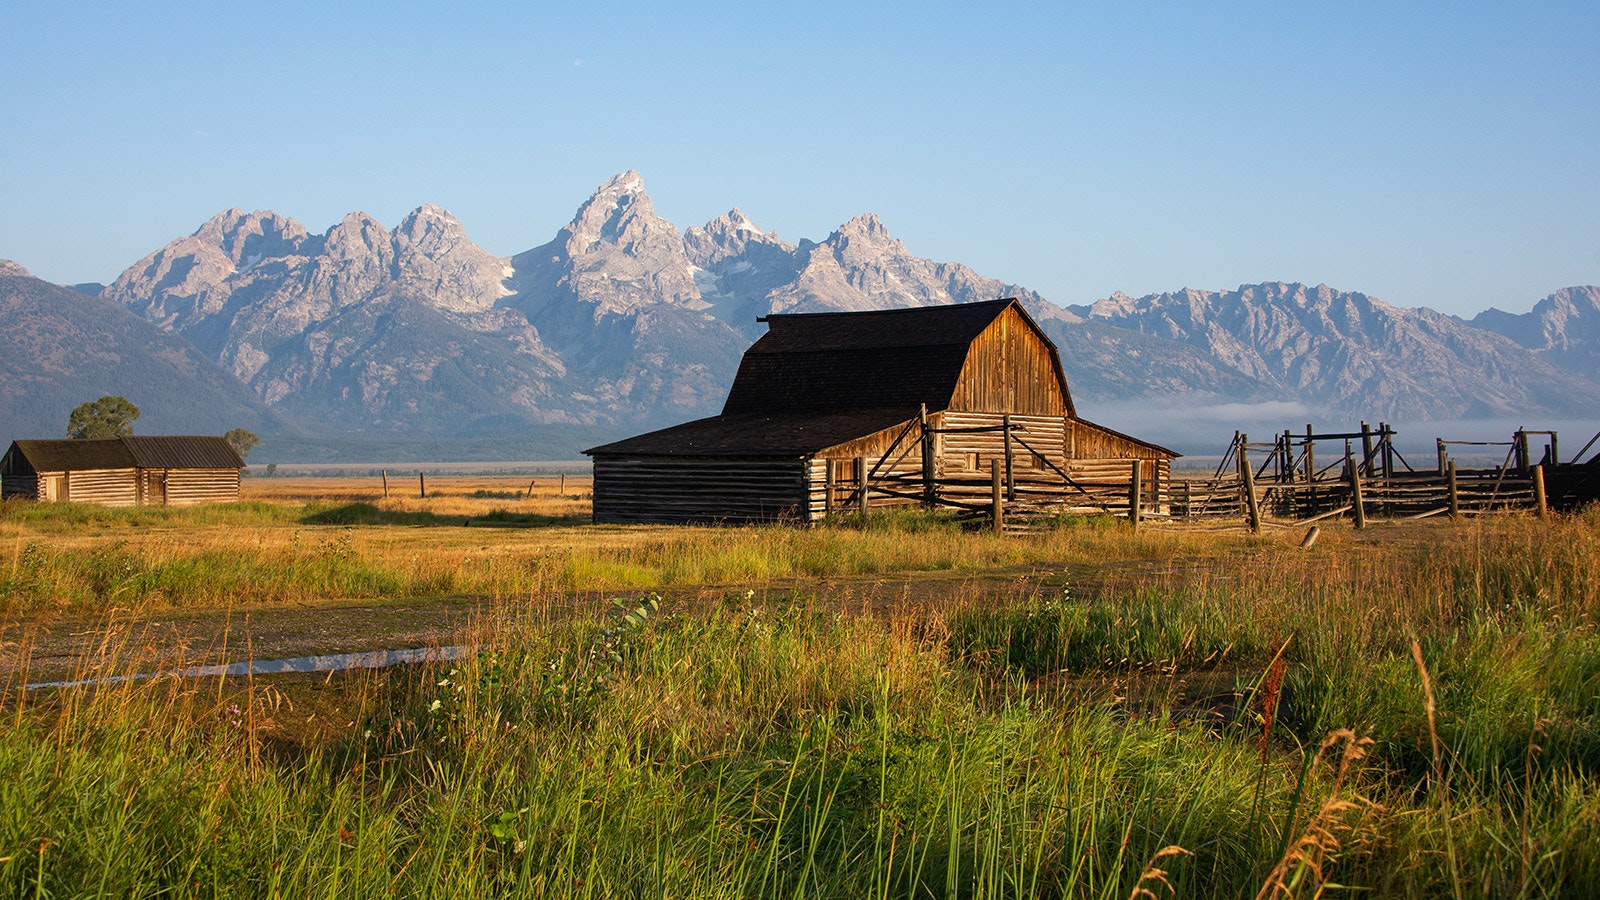 The John Moulton Barn on Mormon Row in Grand Teton National Park is almost as famous as the TA Moulton Barn, and photographed nearly as much.